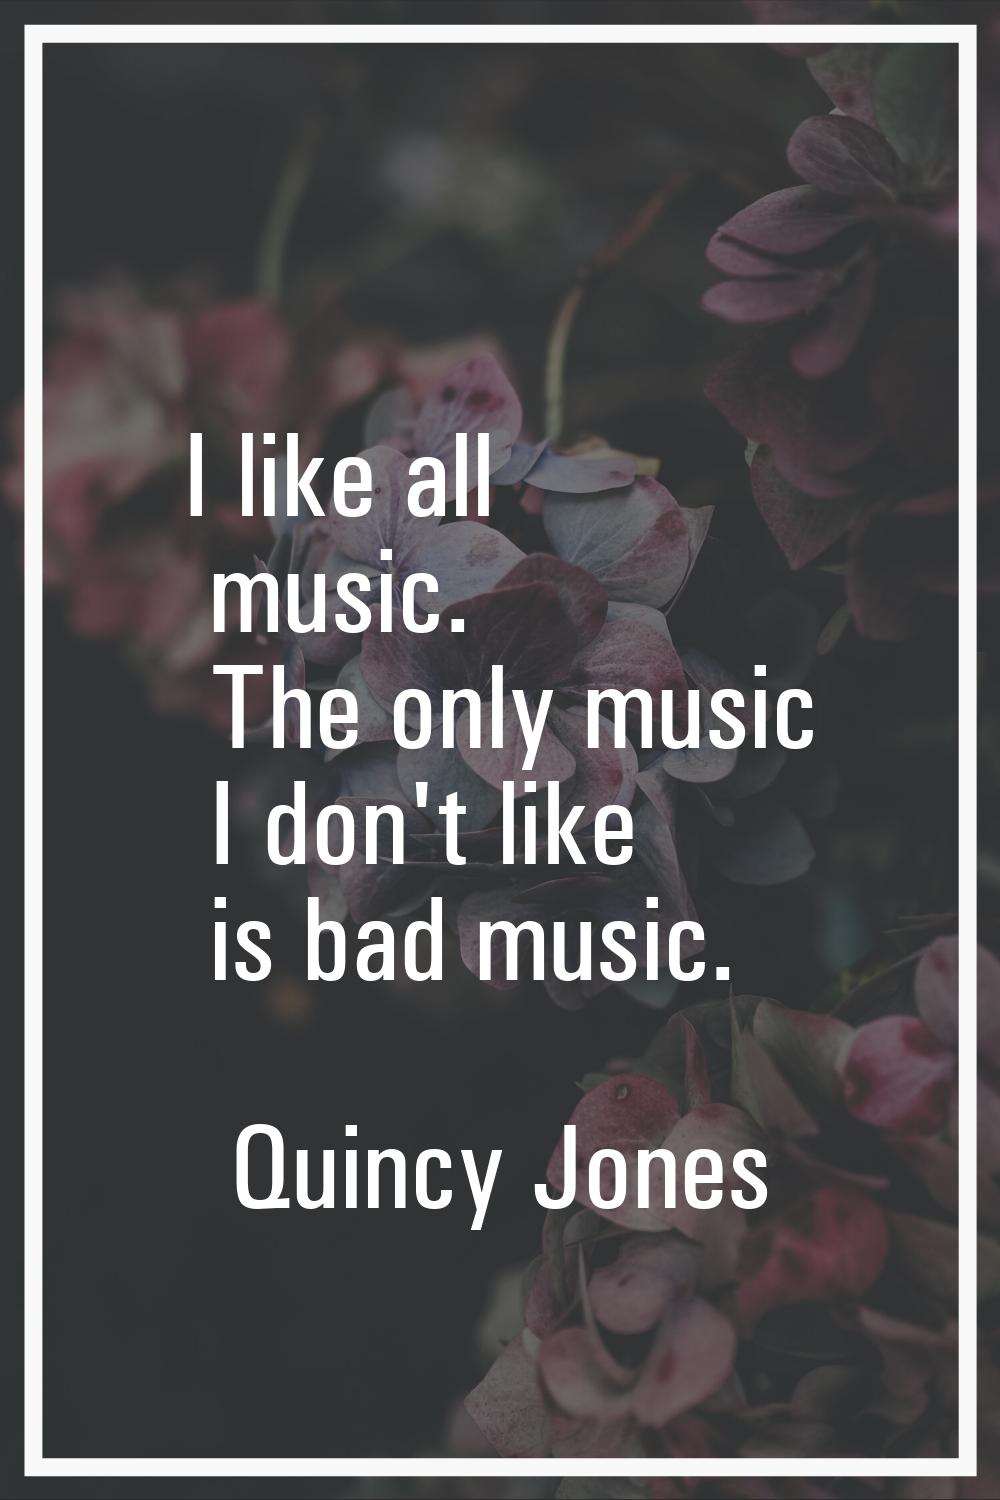 I like all music. The only music I don't like is bad music.